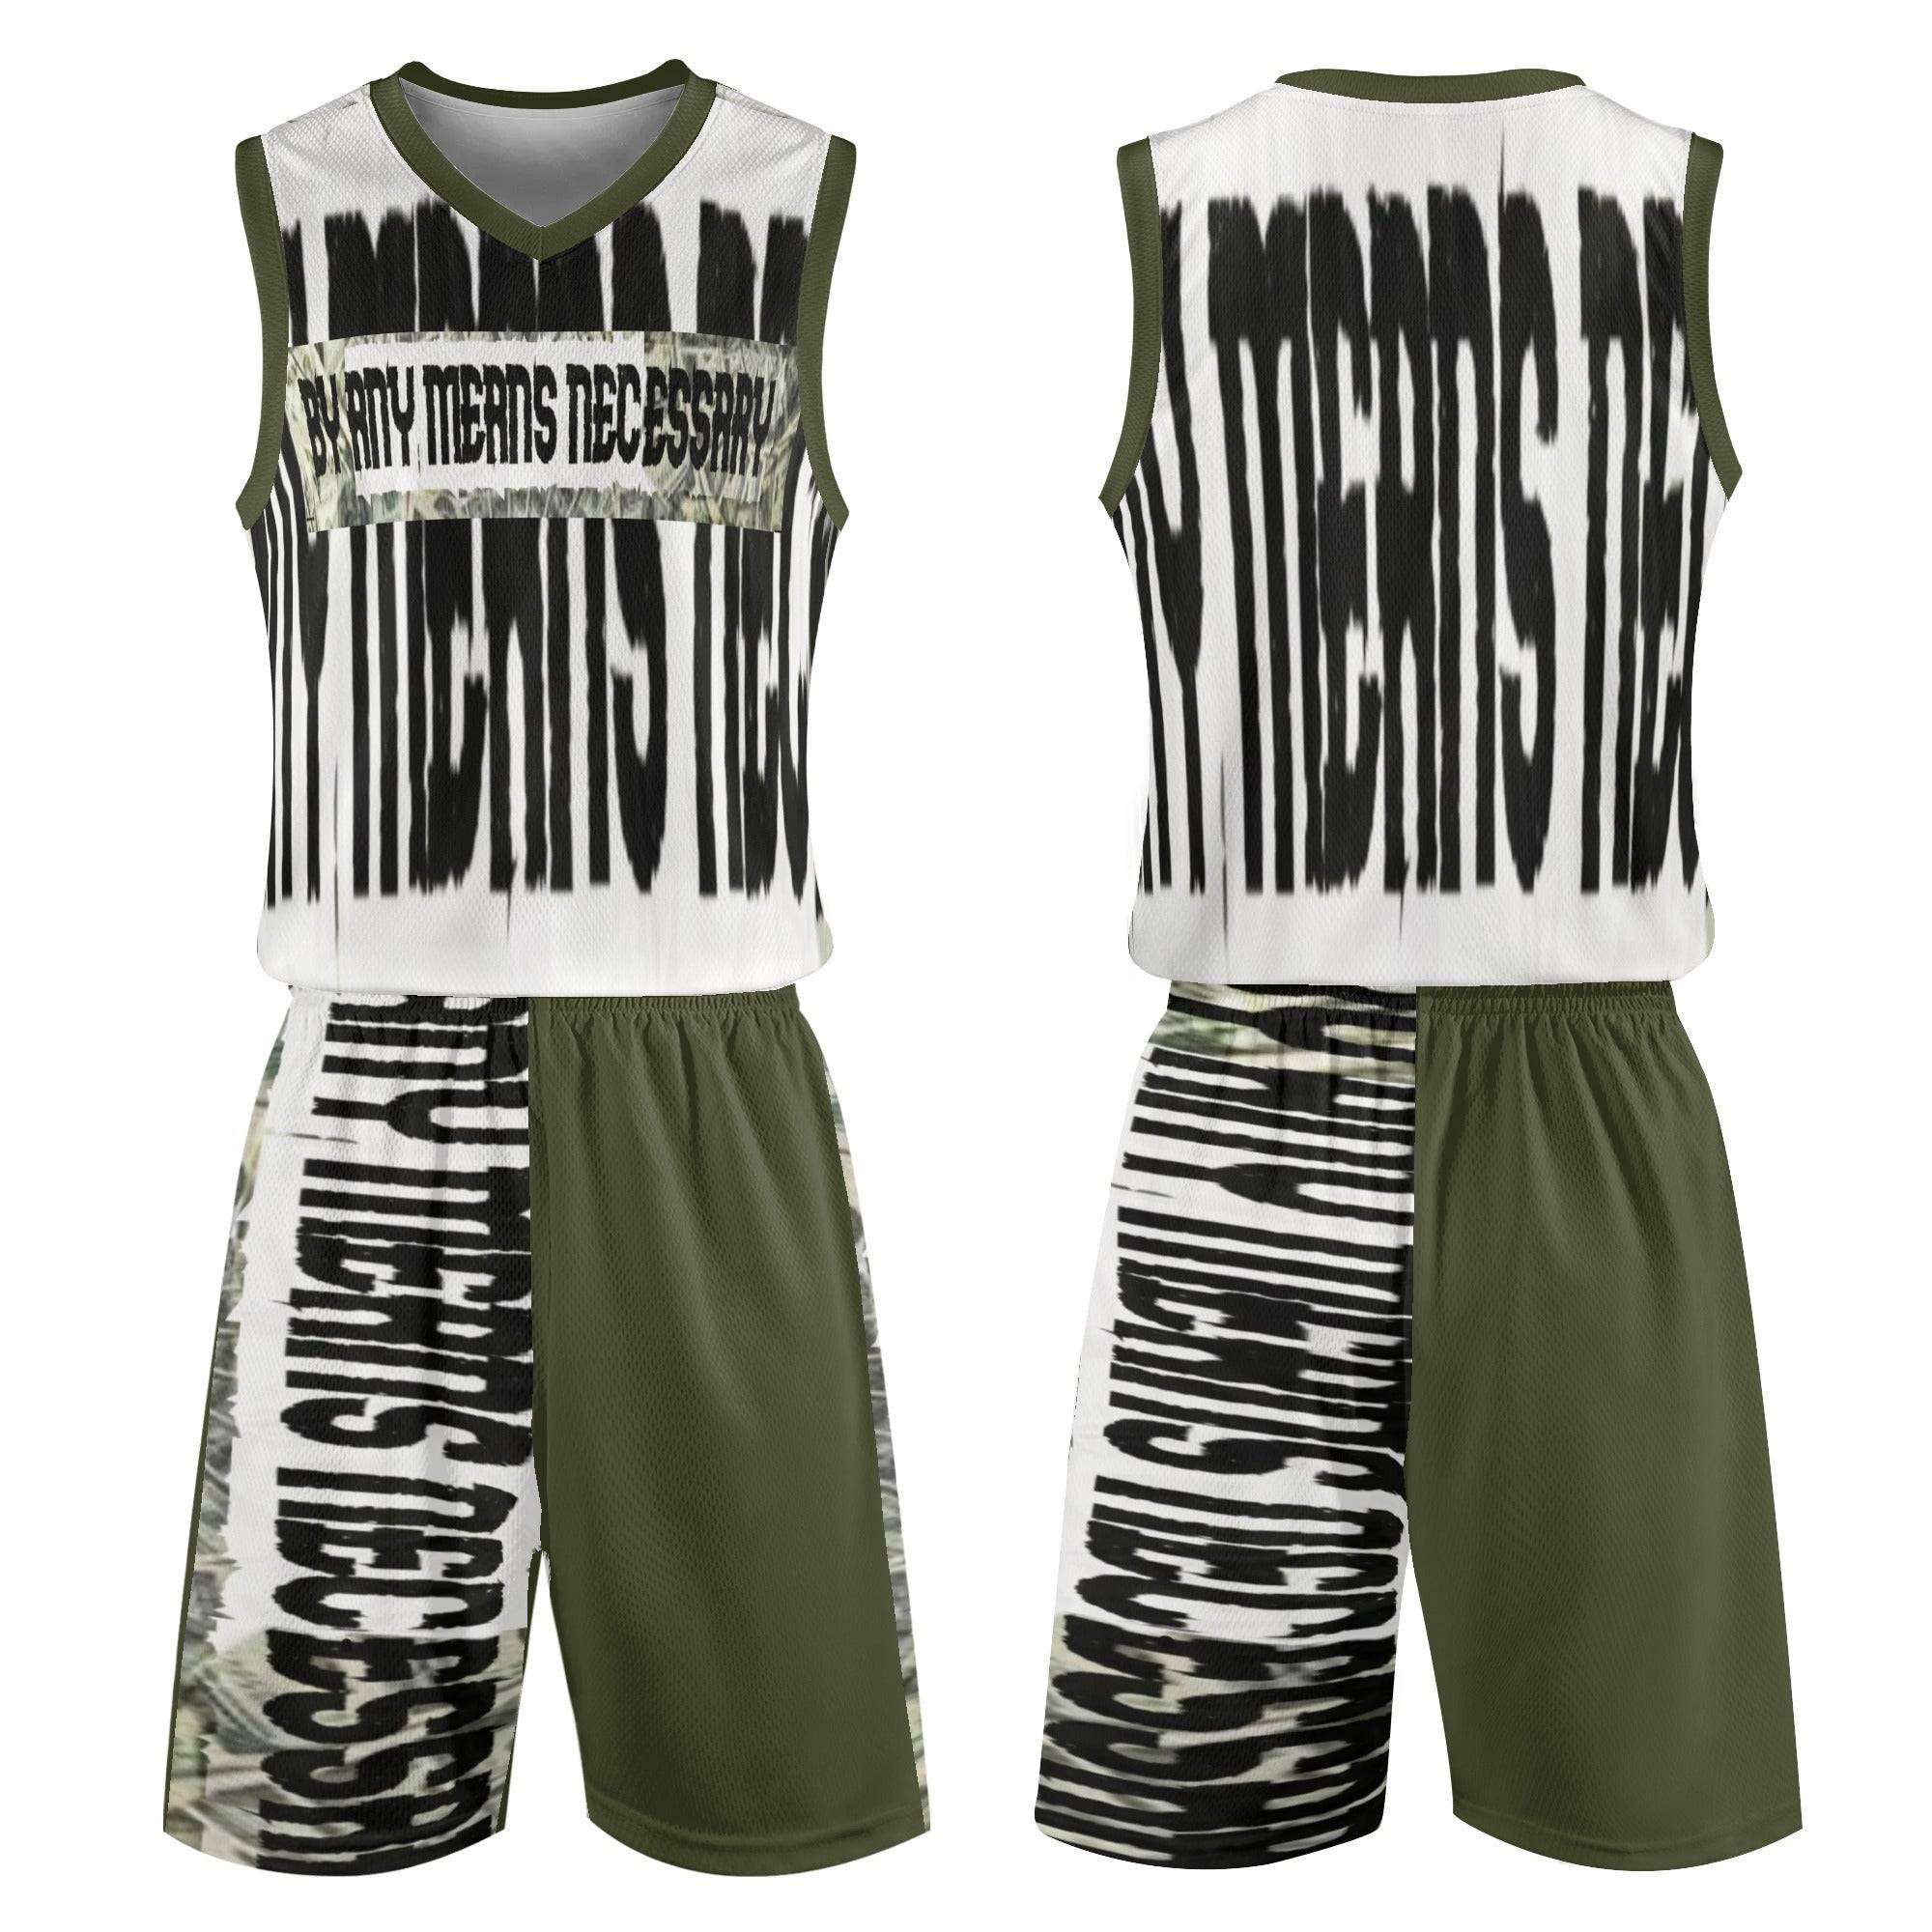 B.A.M.N - By Any Means Necessary Army Green Basketball Jersey Matching Short Sets Outfit